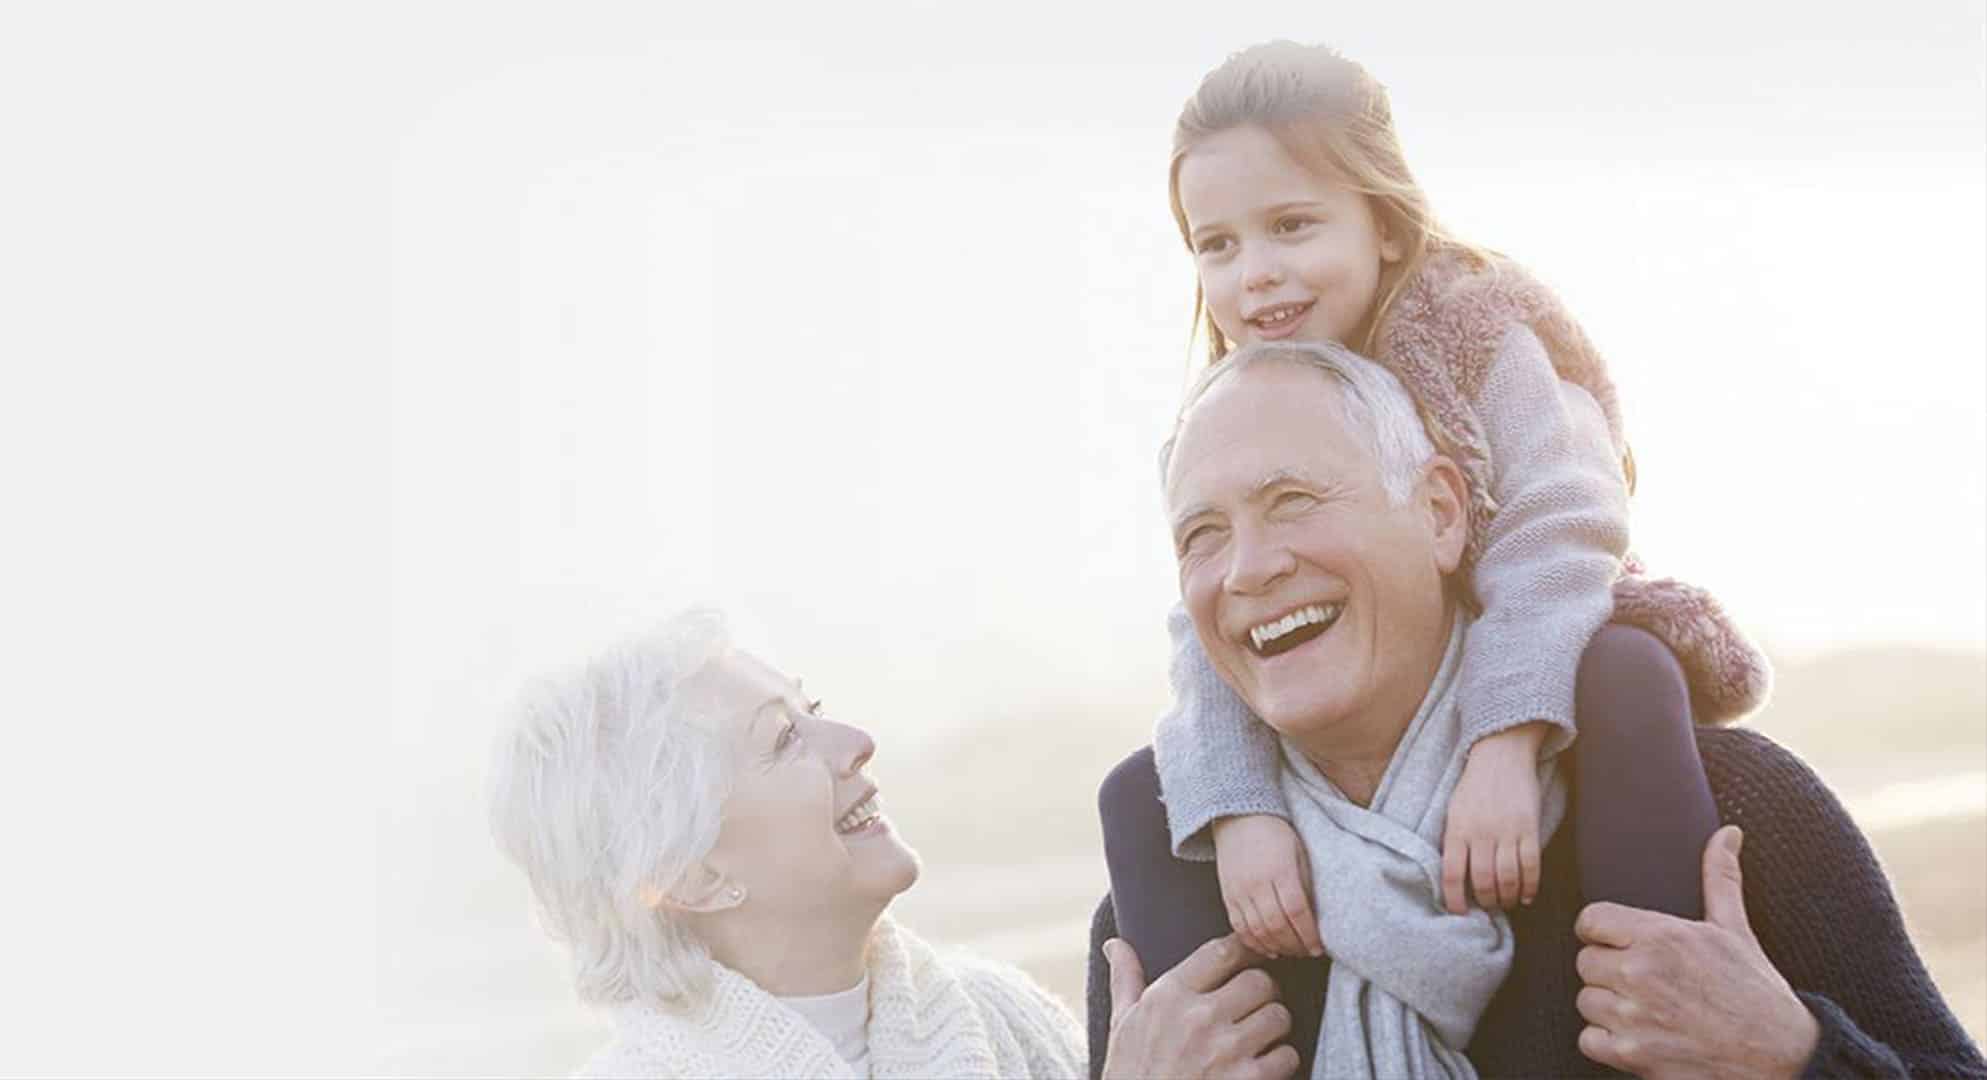 Girl smiling, riding on grandpa's shoulders with grandma watching and smiling